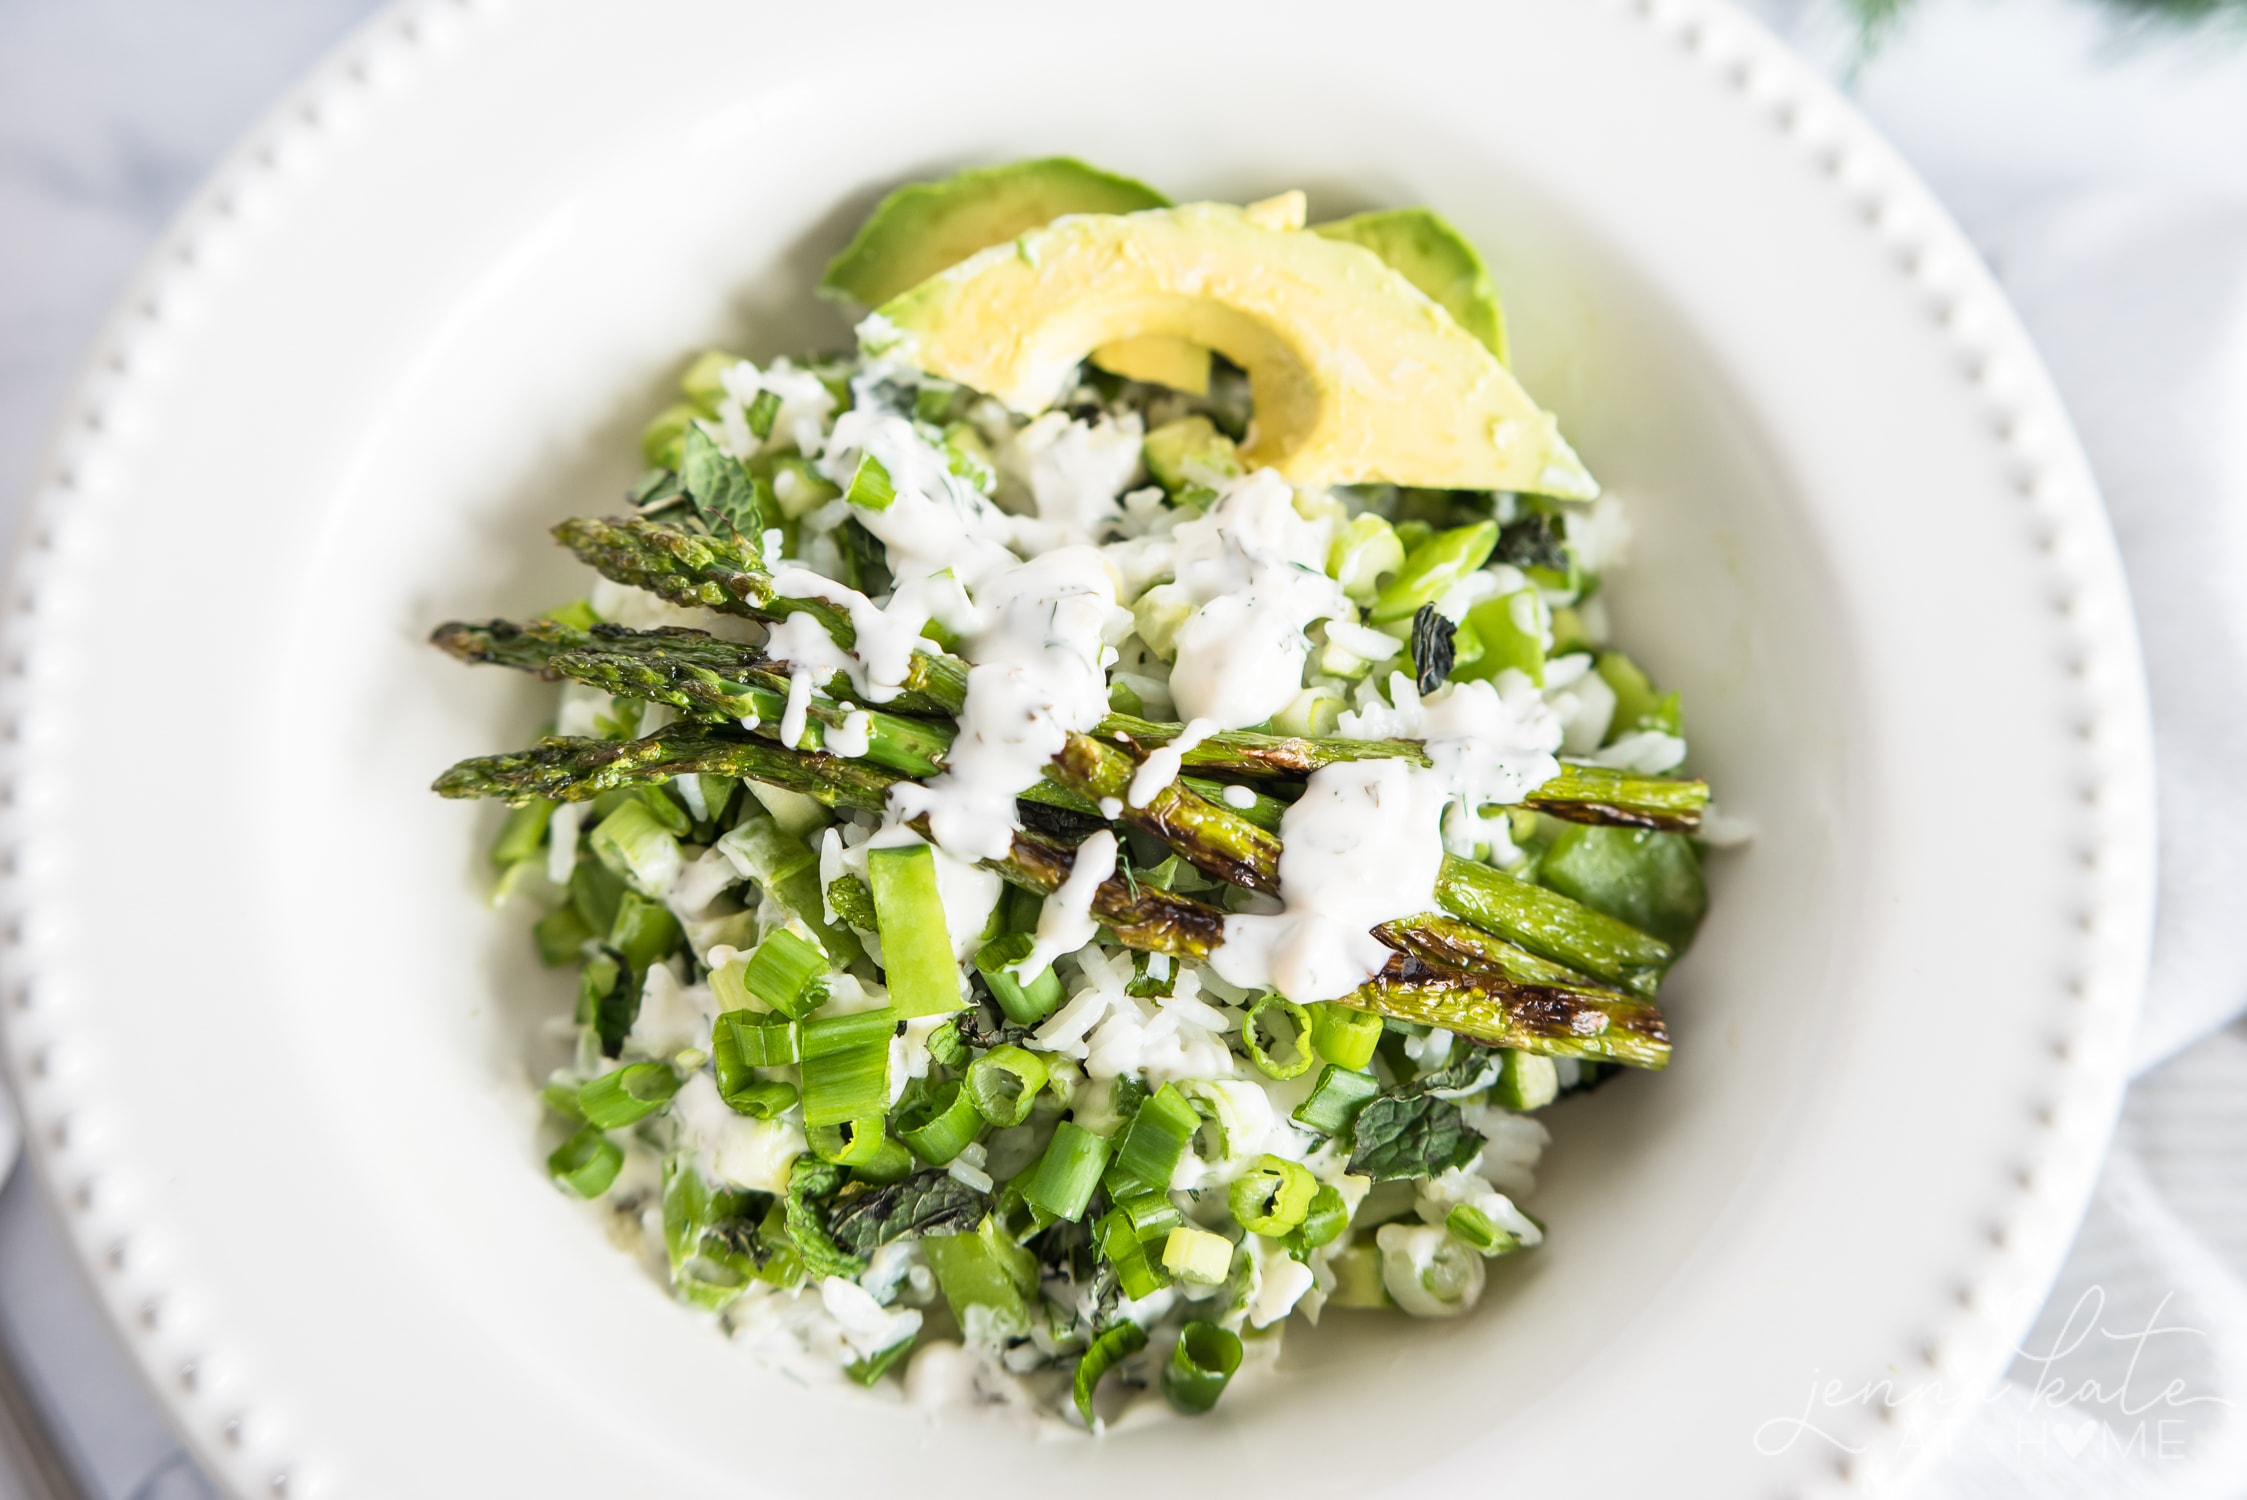 green goddess rice bowl filled with basmati rice and vibrant green vegetables makes a healthy main course, lunch or side dish